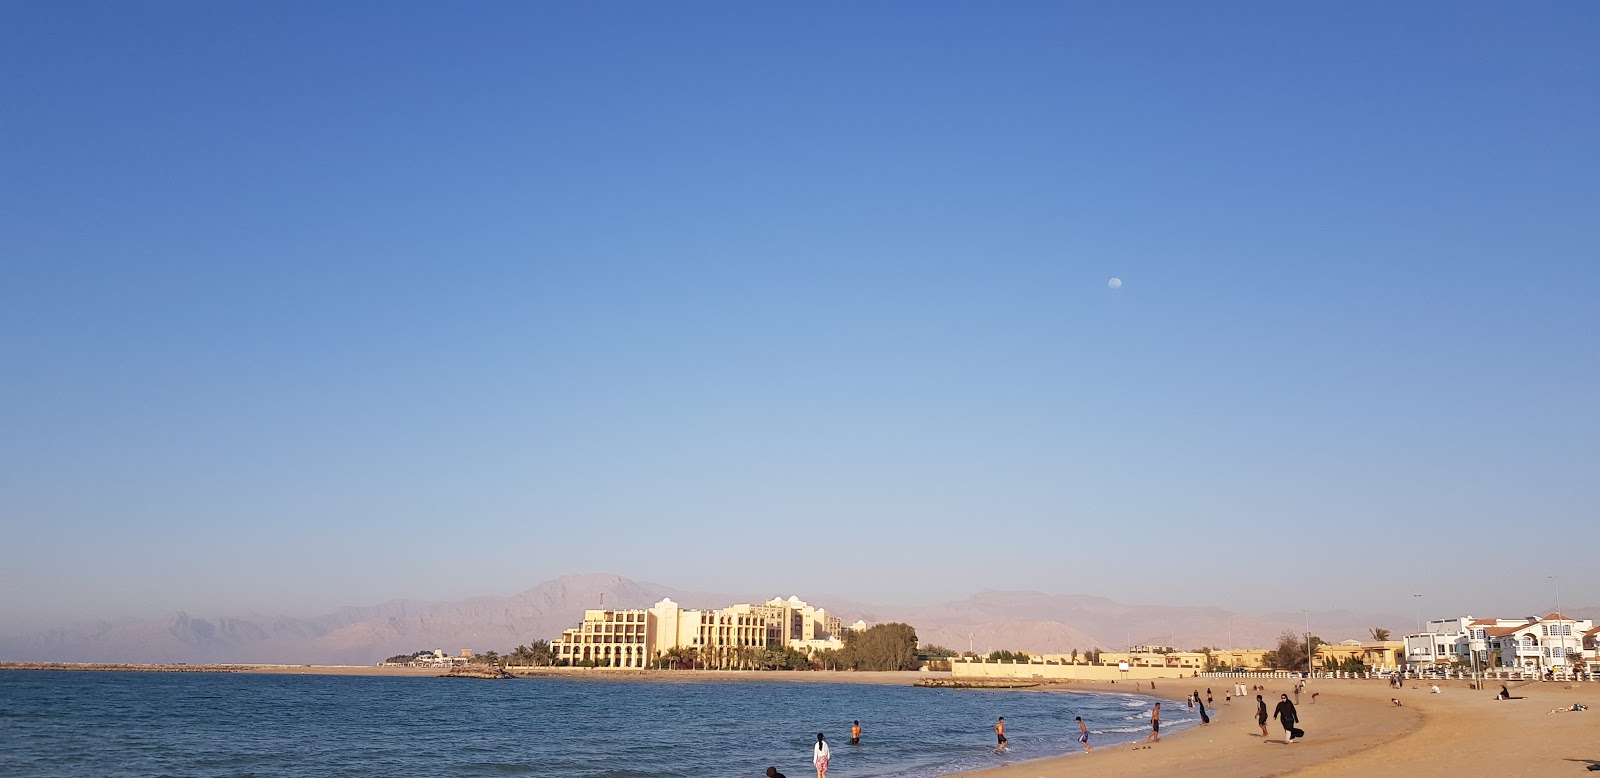 Experience the beauty of Mareedh Beach, Ras Al Khaimah, a serene coastal spot with crystal clear waters, soft sandy shores, and palm trees swaying in the breeze. Perfect for a relaxing getaway or a fun day out with friends and family.